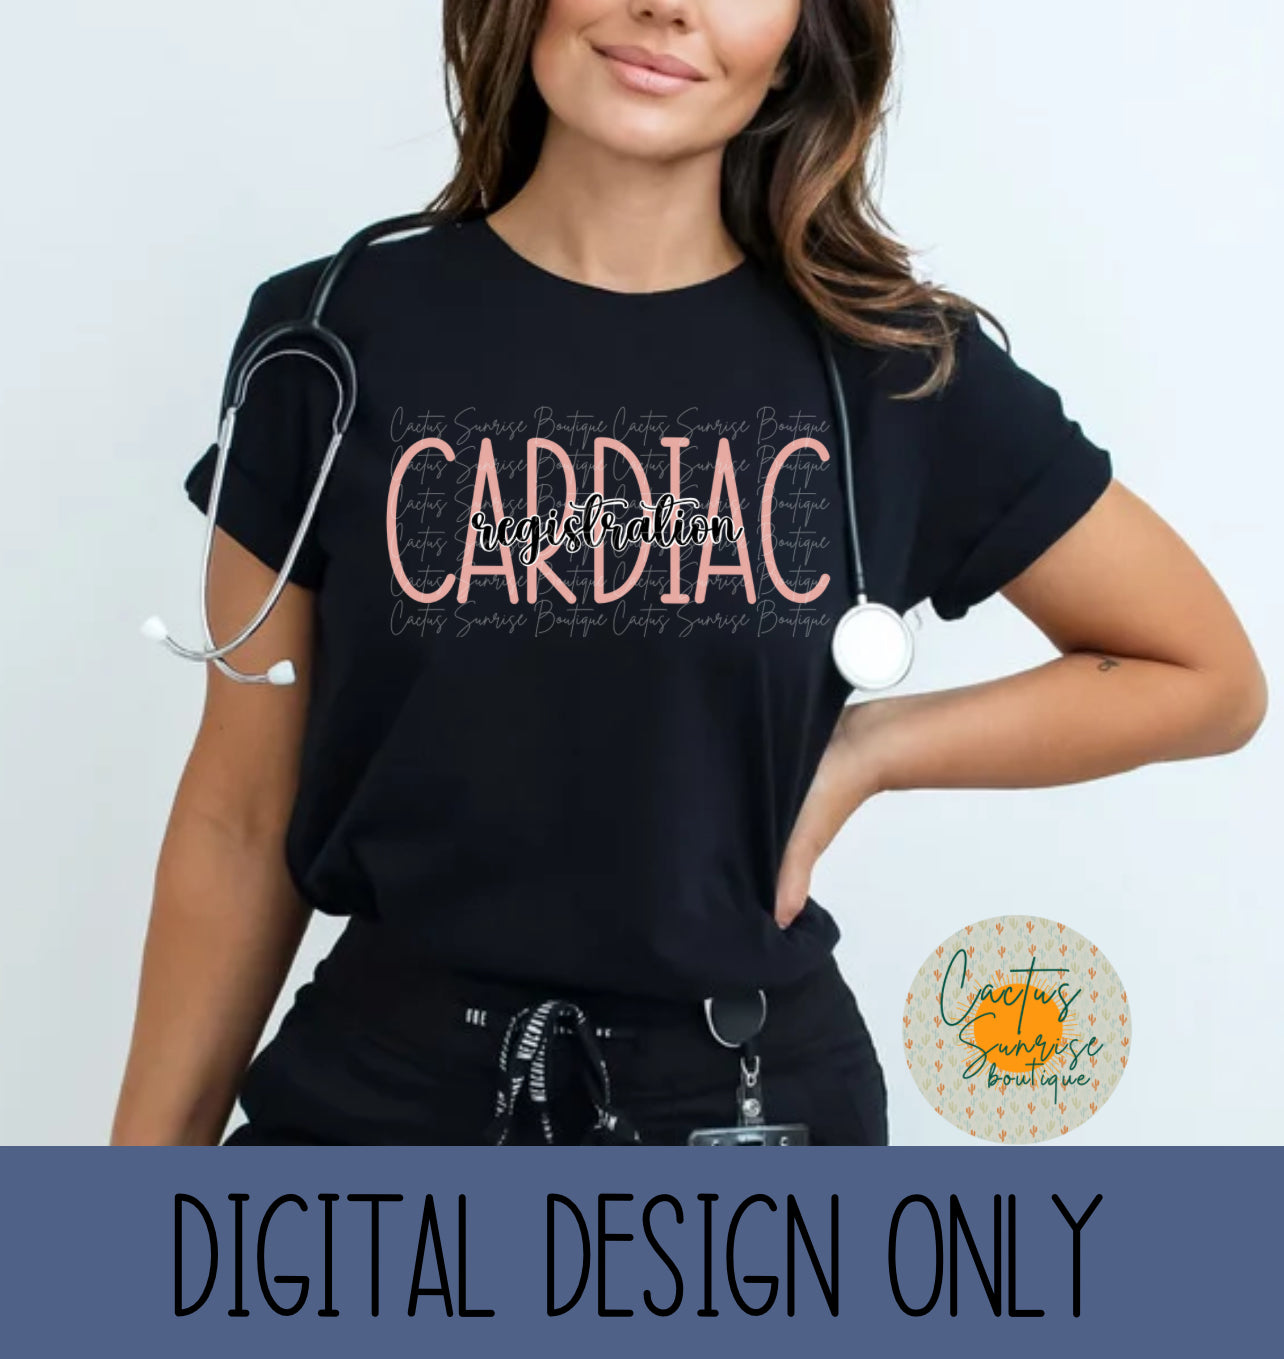 Cardic Registration Peach Digital file- No physical product